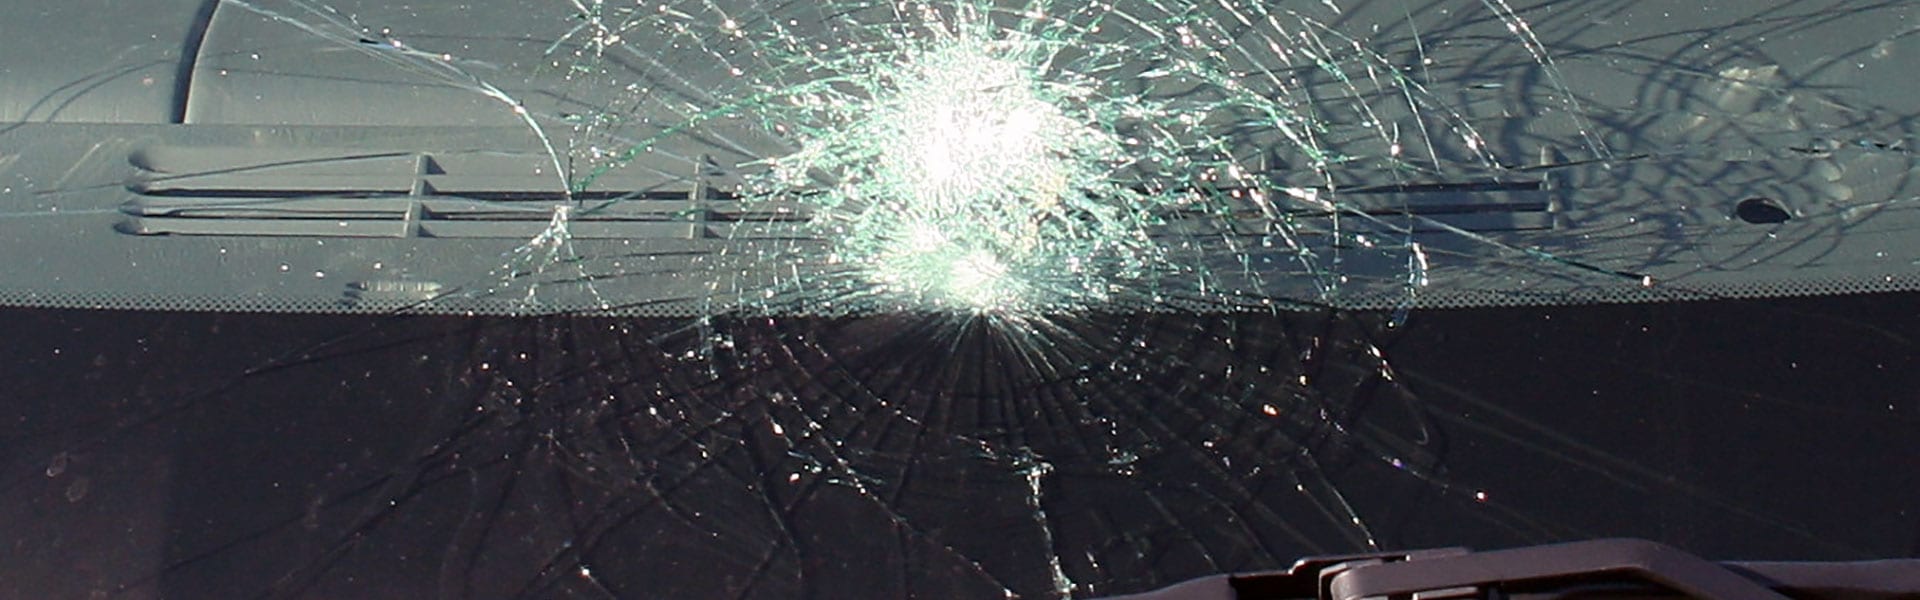 Pacific Auto Glass: Windshield Replacement Services in San Diego, California